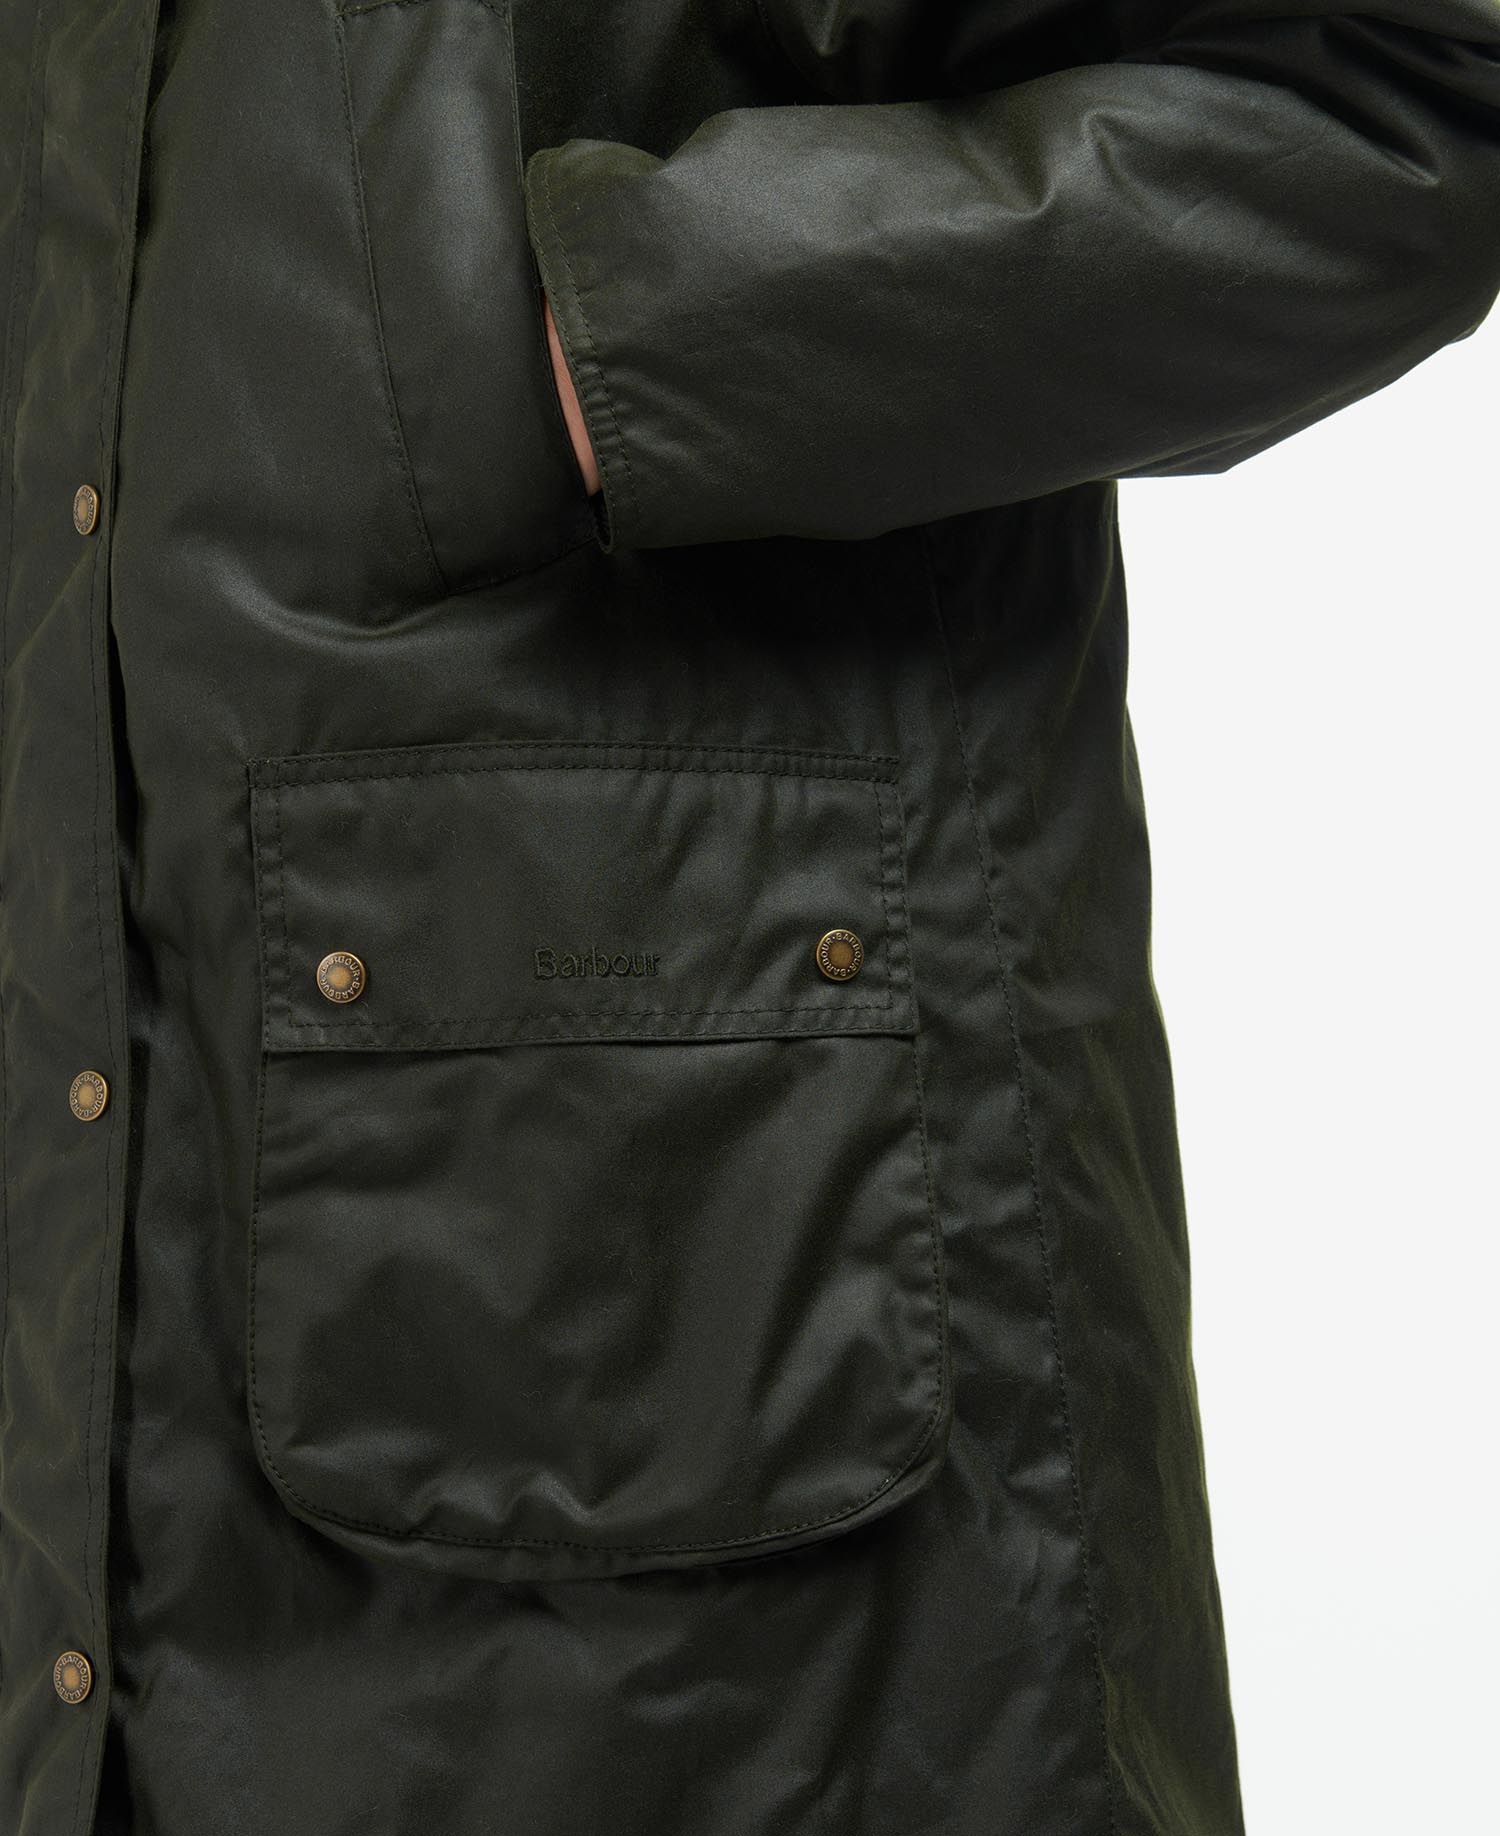 Shop the Barbour Gunnister Wax Jacket today. | Barbour